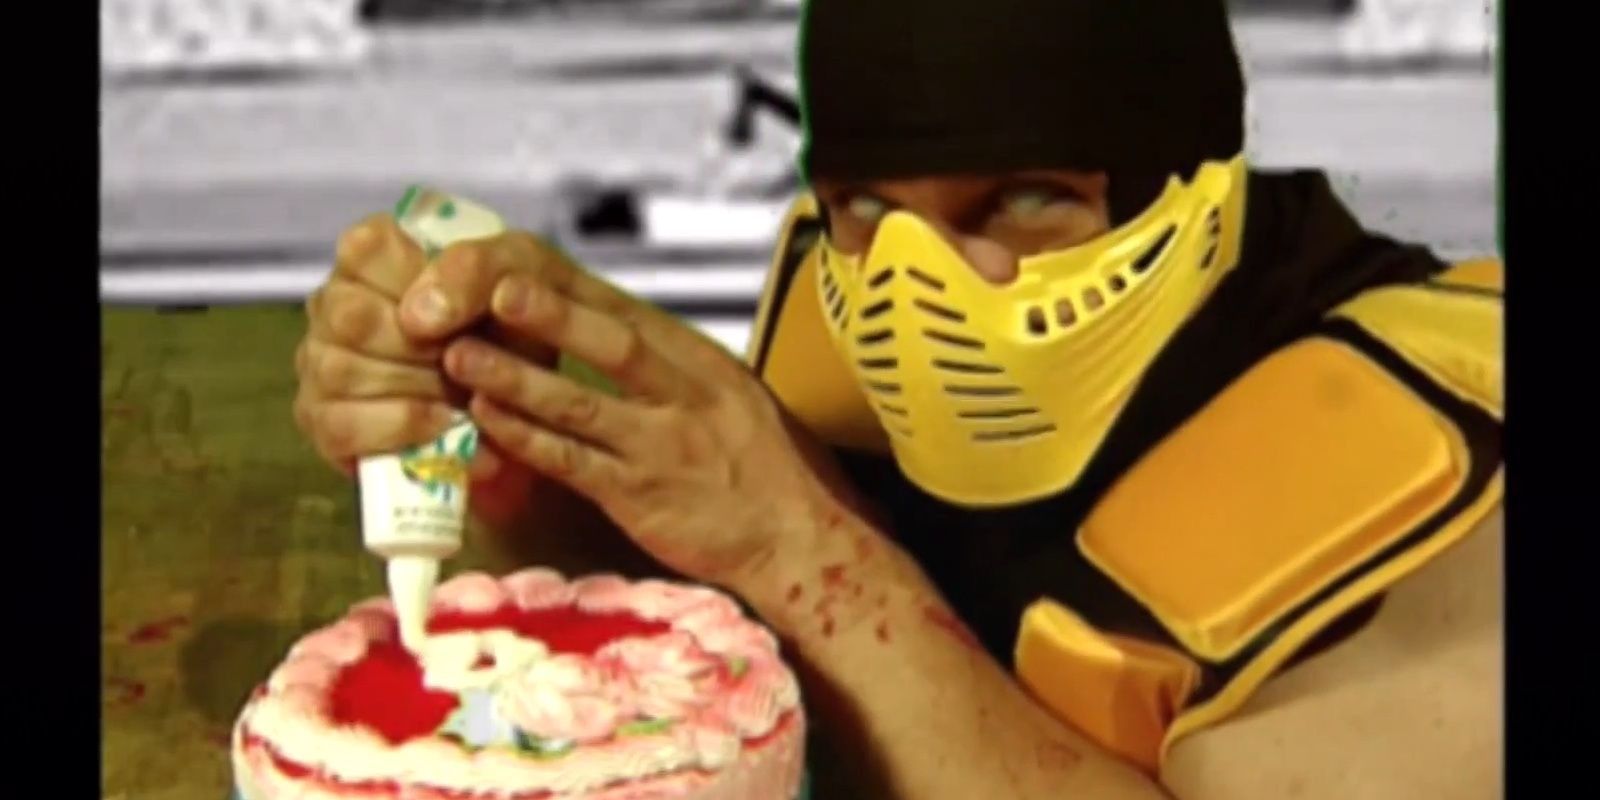 Scorpion icing a cake from Cooking With Scorpion in Mortal Kombat: Deadly Alliance.